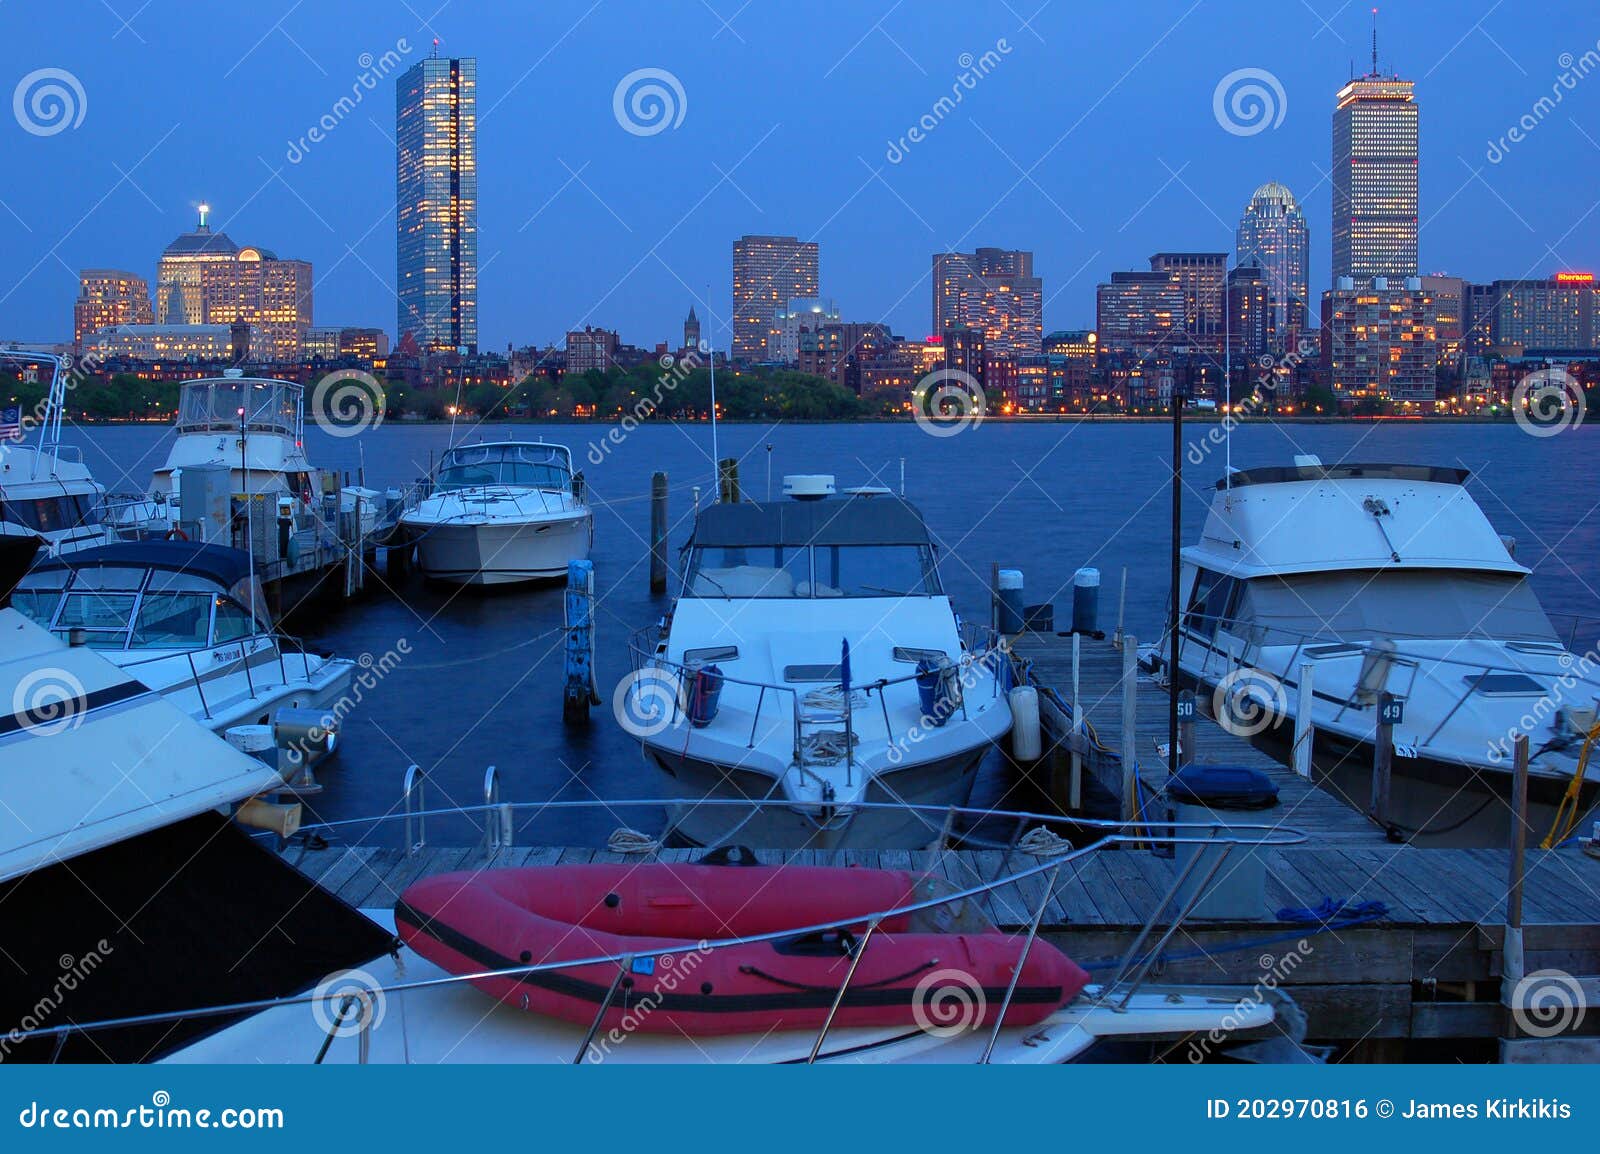 a small marina on the charles river